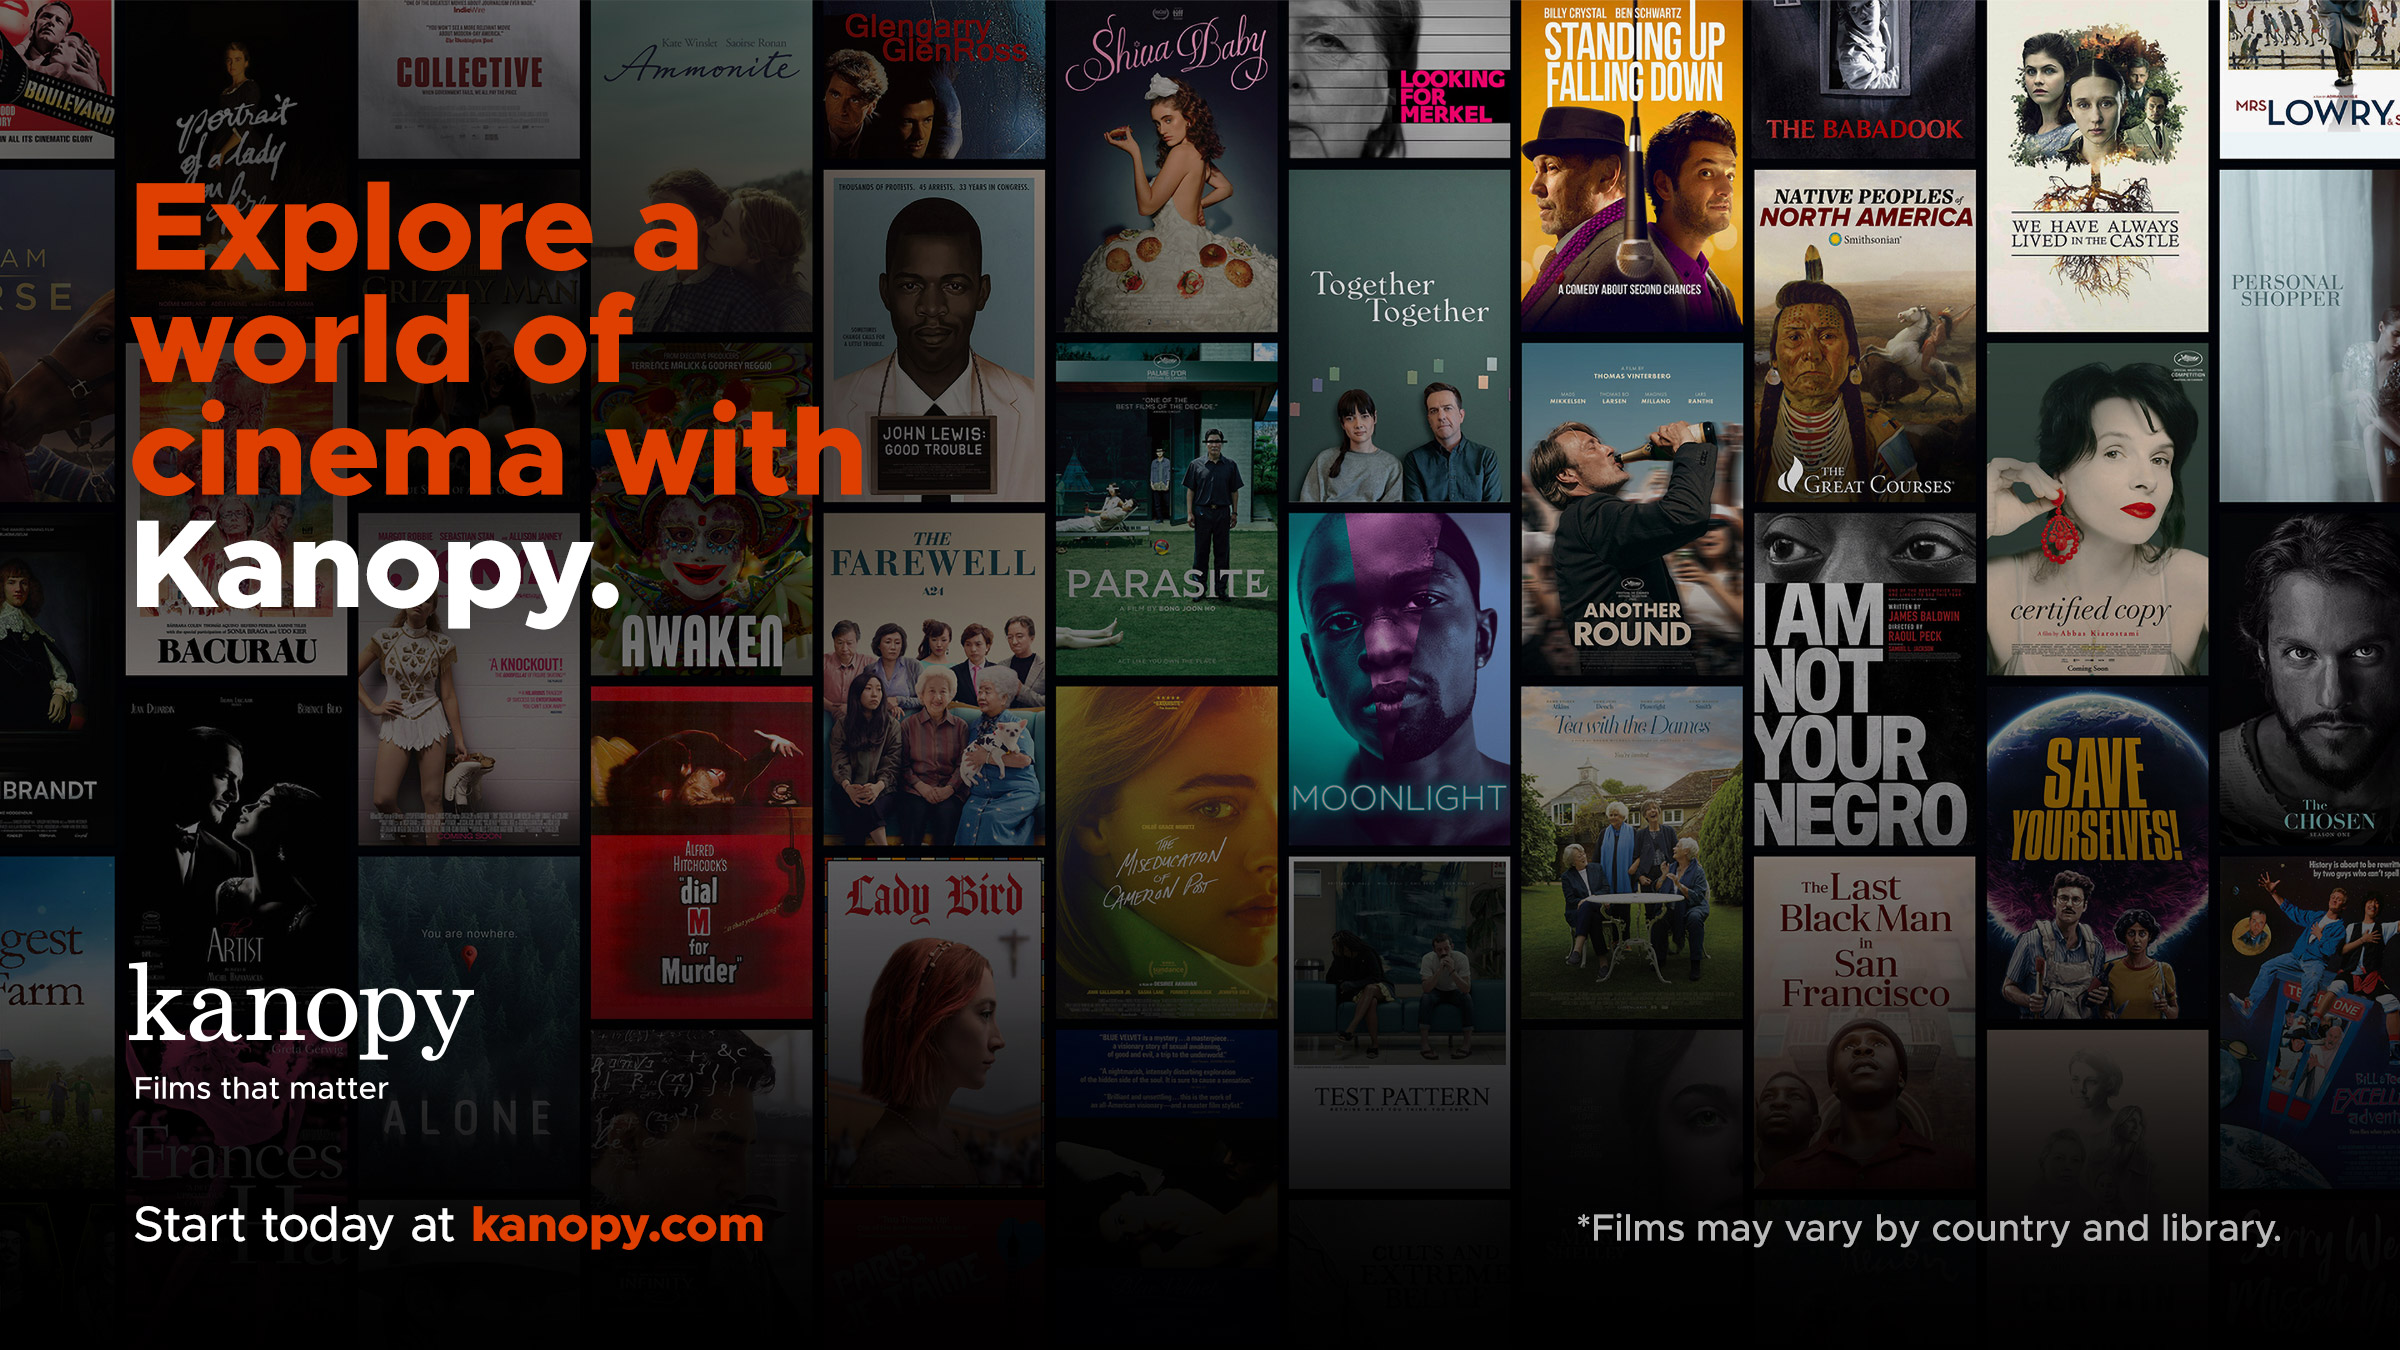 Explore a world of cinema with Kanopy. Start today at kanopy.com.